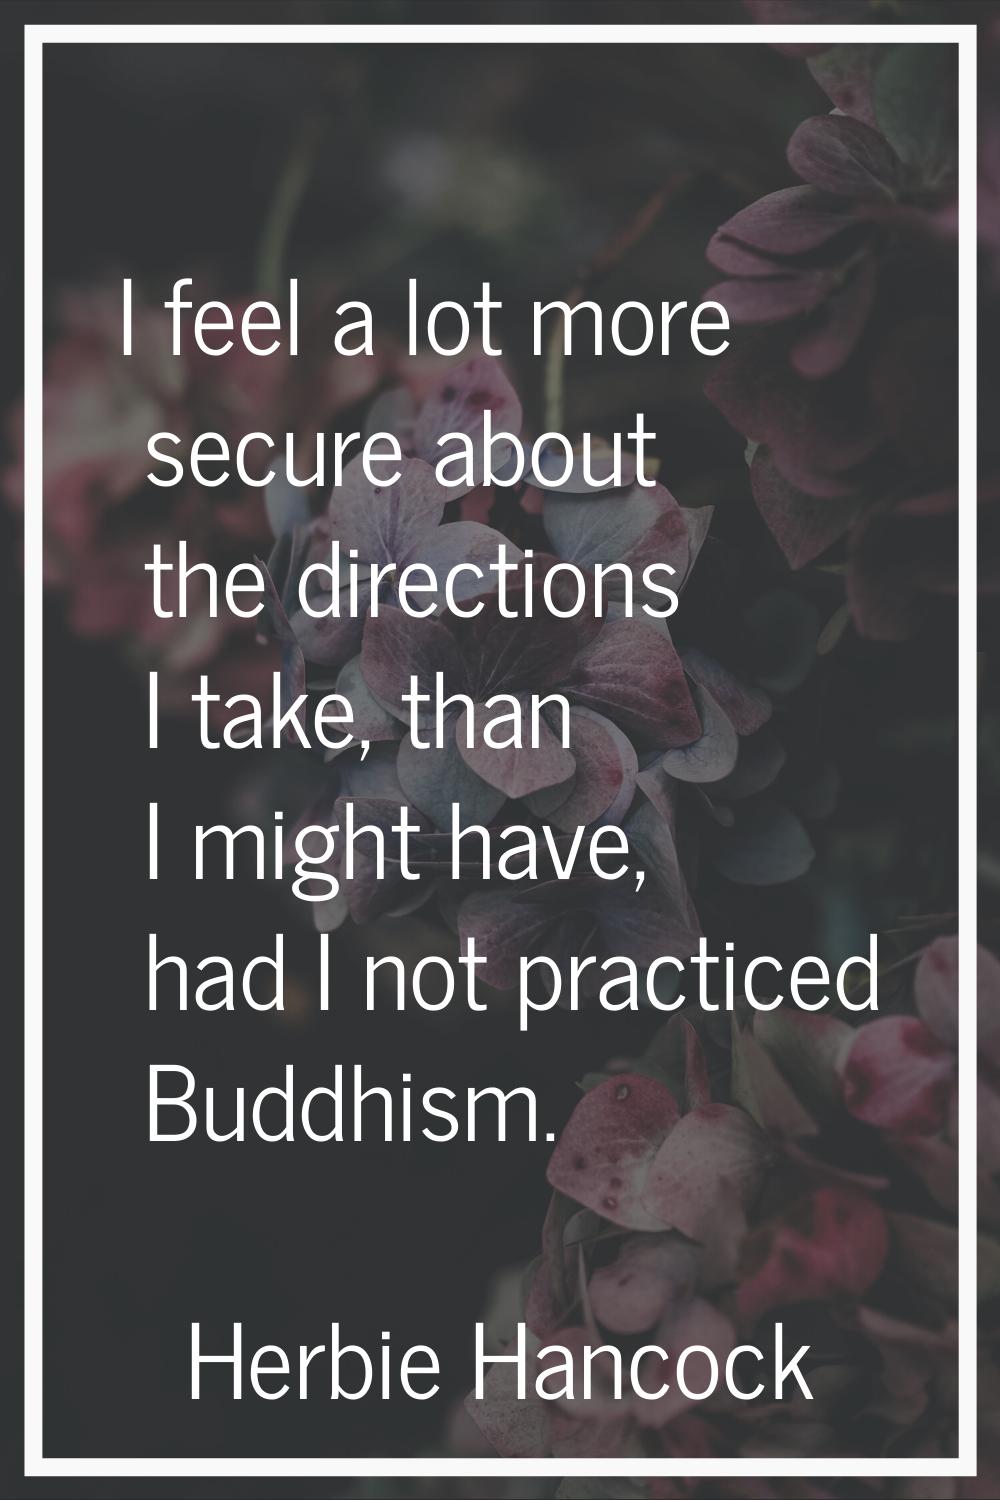 I feel a lot more secure about the directions I take, than I might have, had I not practiced Buddhi